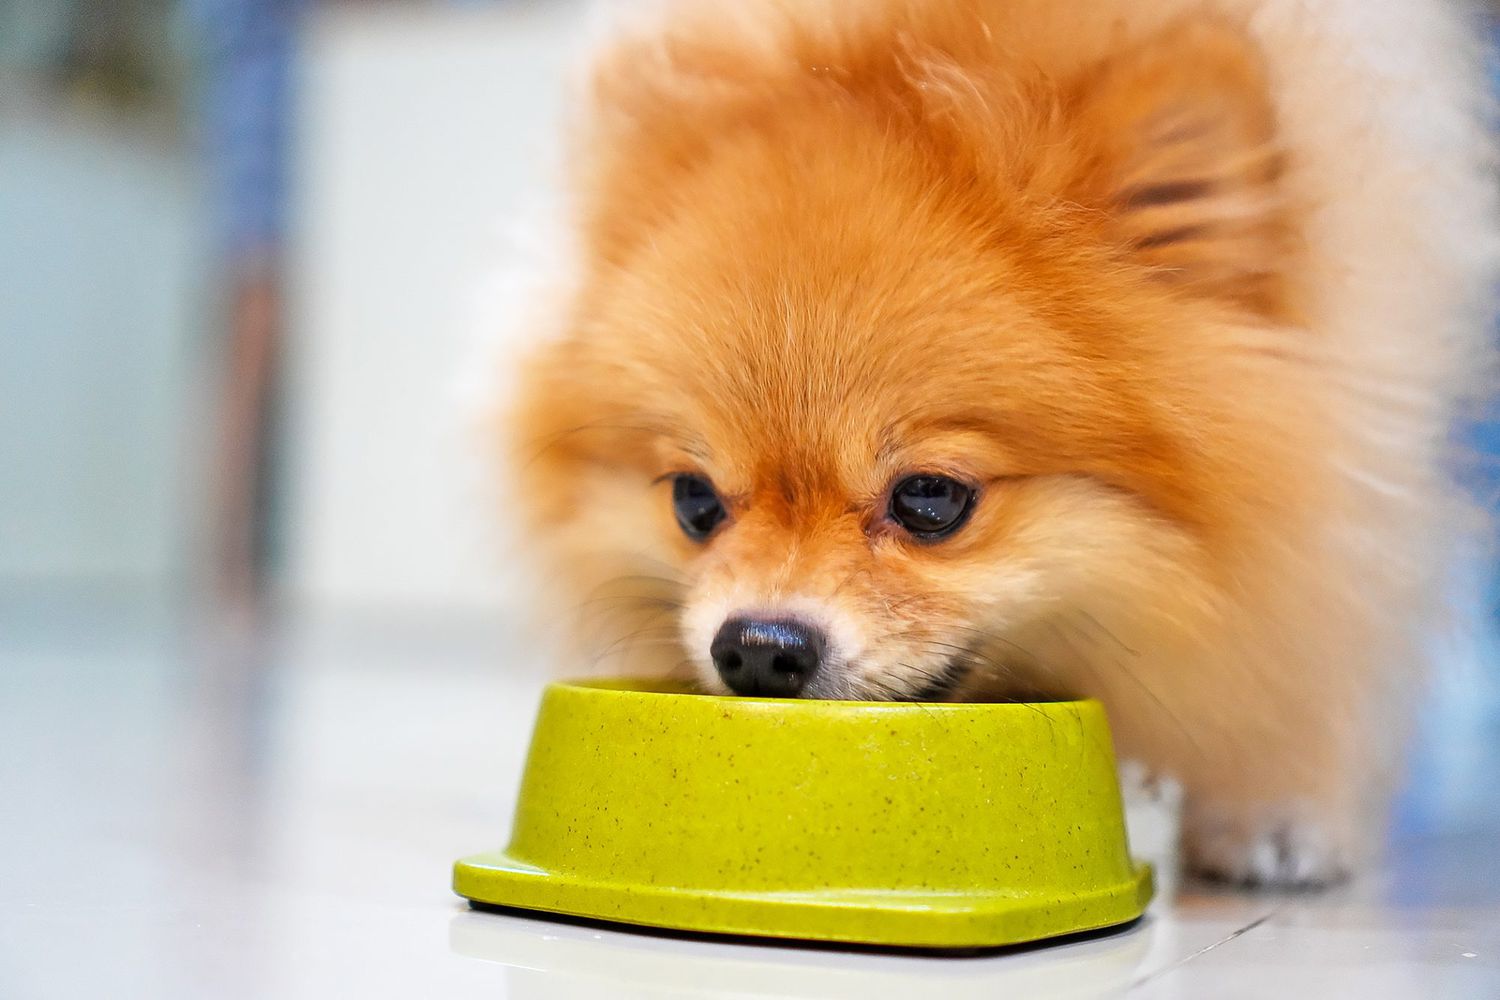 Fromm Family Pet Food Recalls Dog Foods Because of Potentially High Vitamin  D Levels | Daily Paws